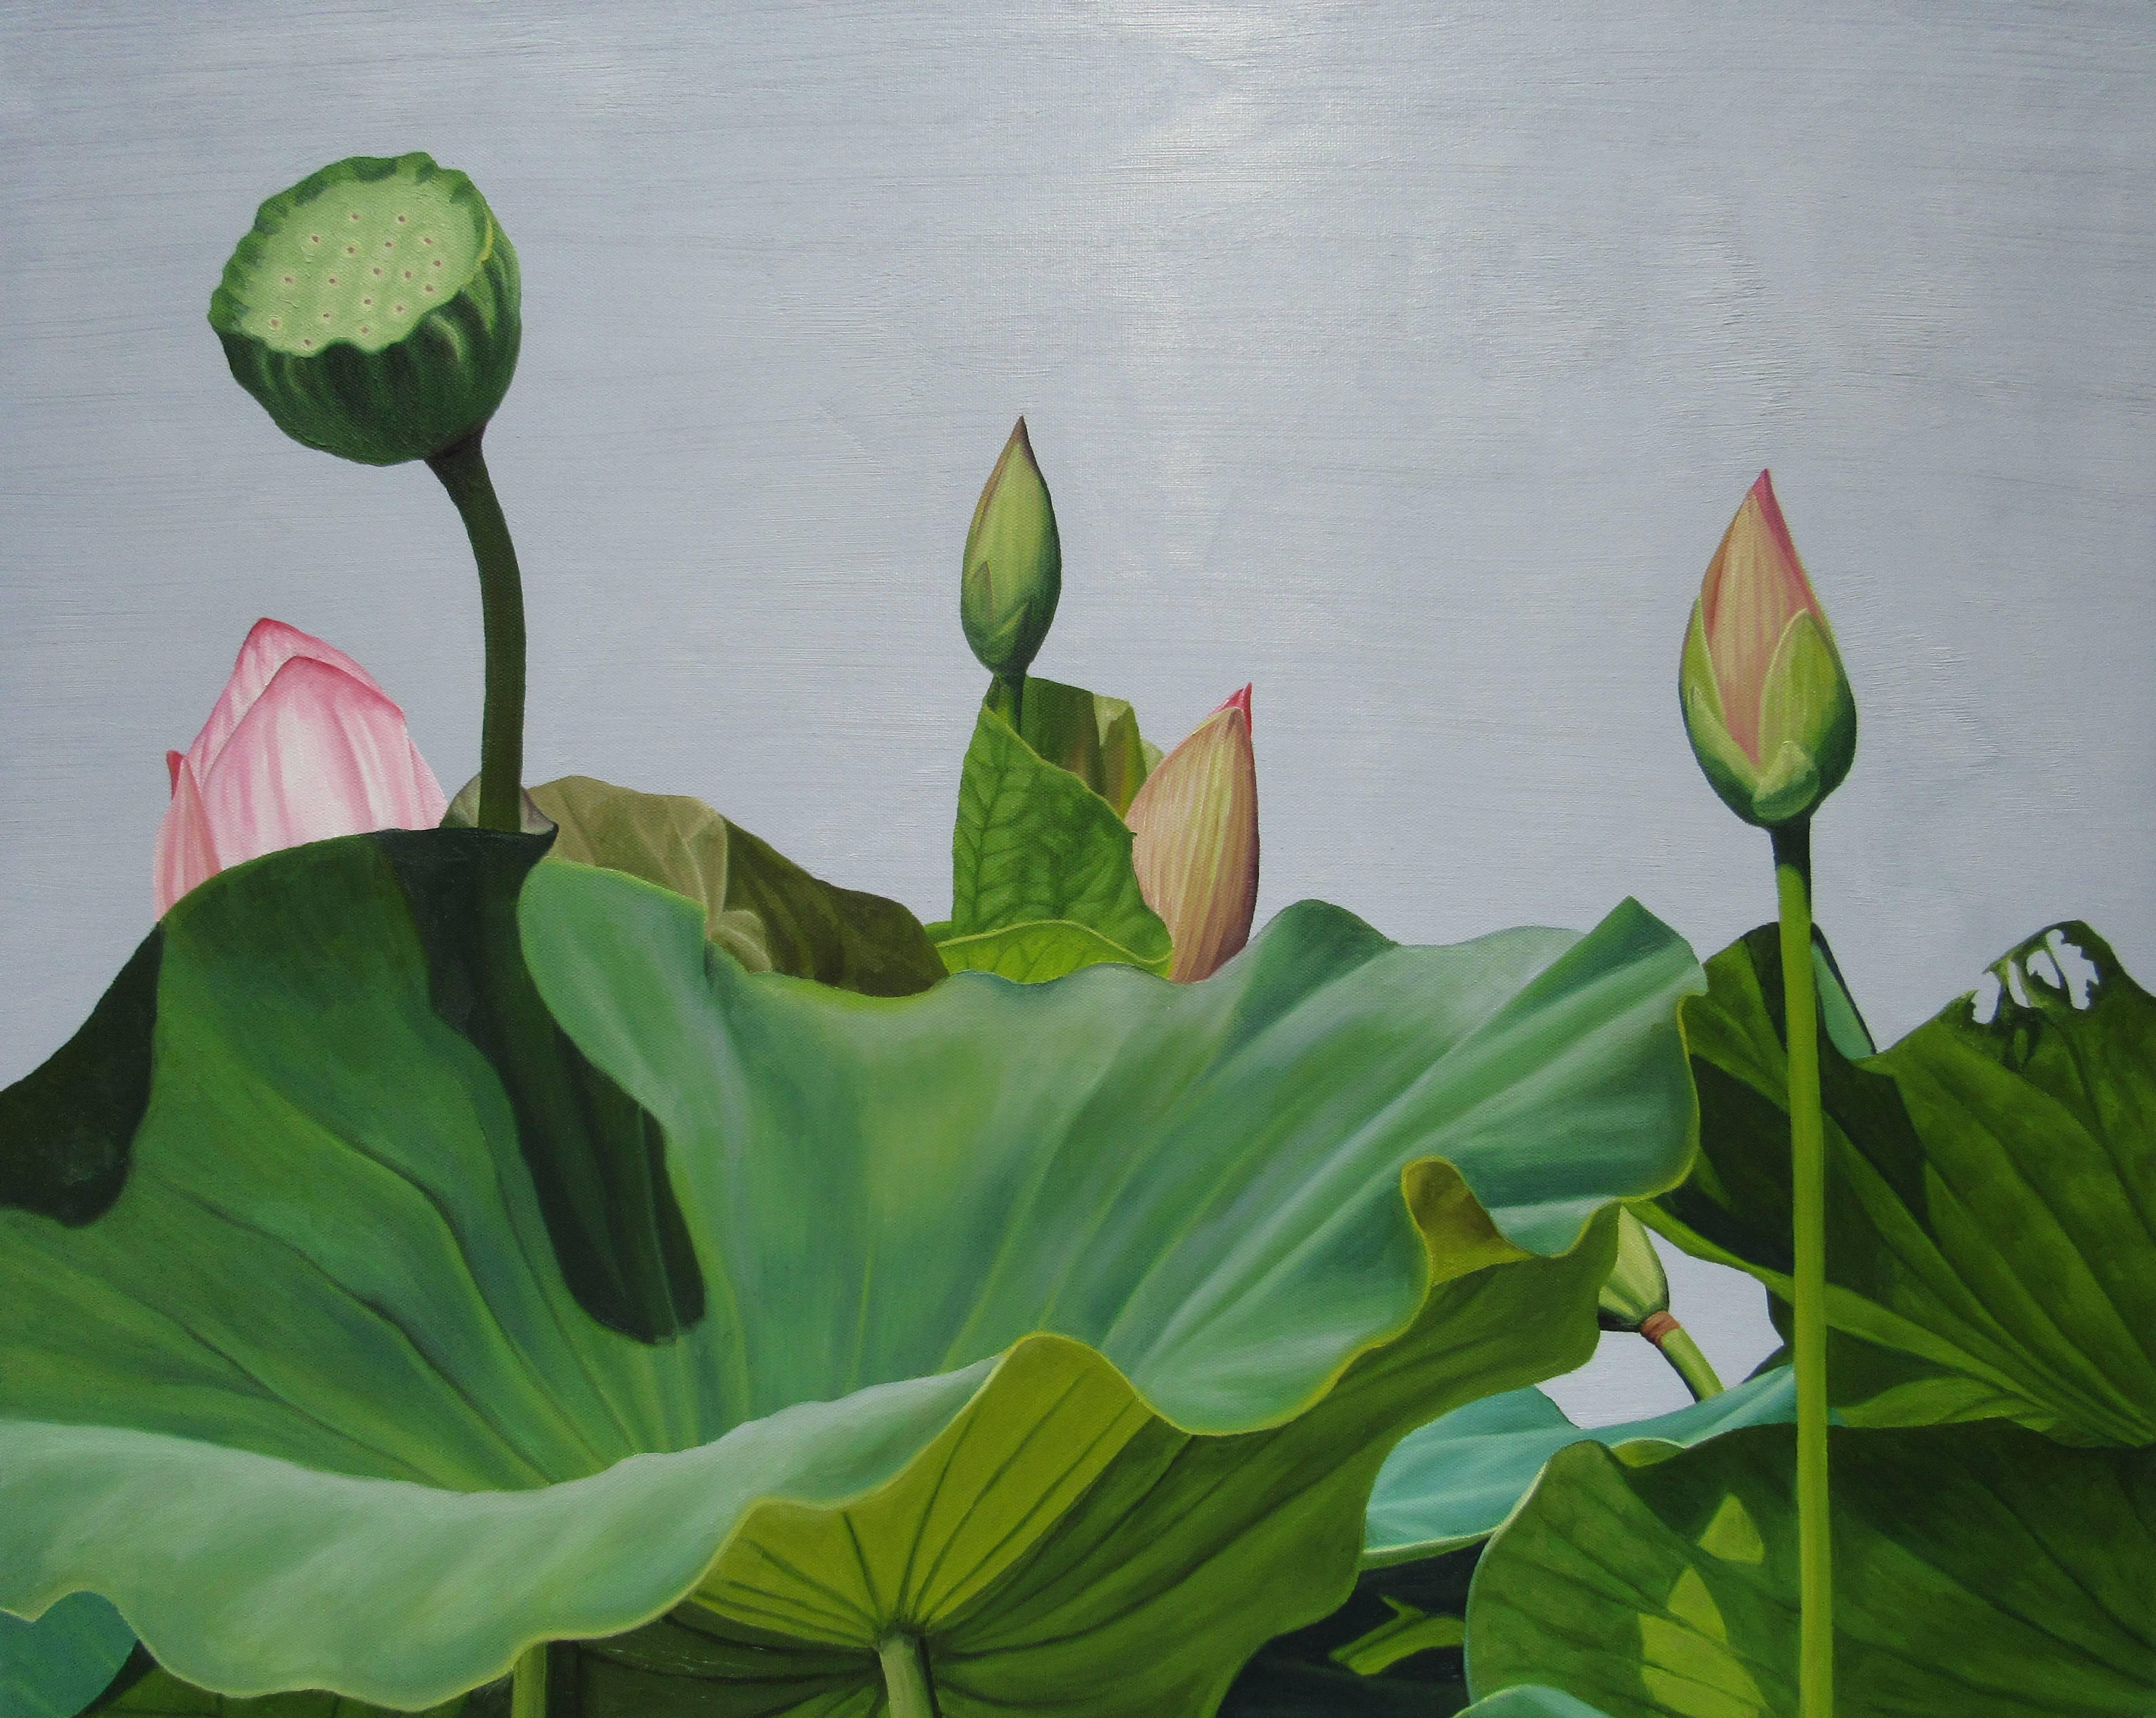 Frank DiPietro Figurative Painting - Lotus Number Two (Realist Floral Still Life Painting of Lotus Leaves and Stems)